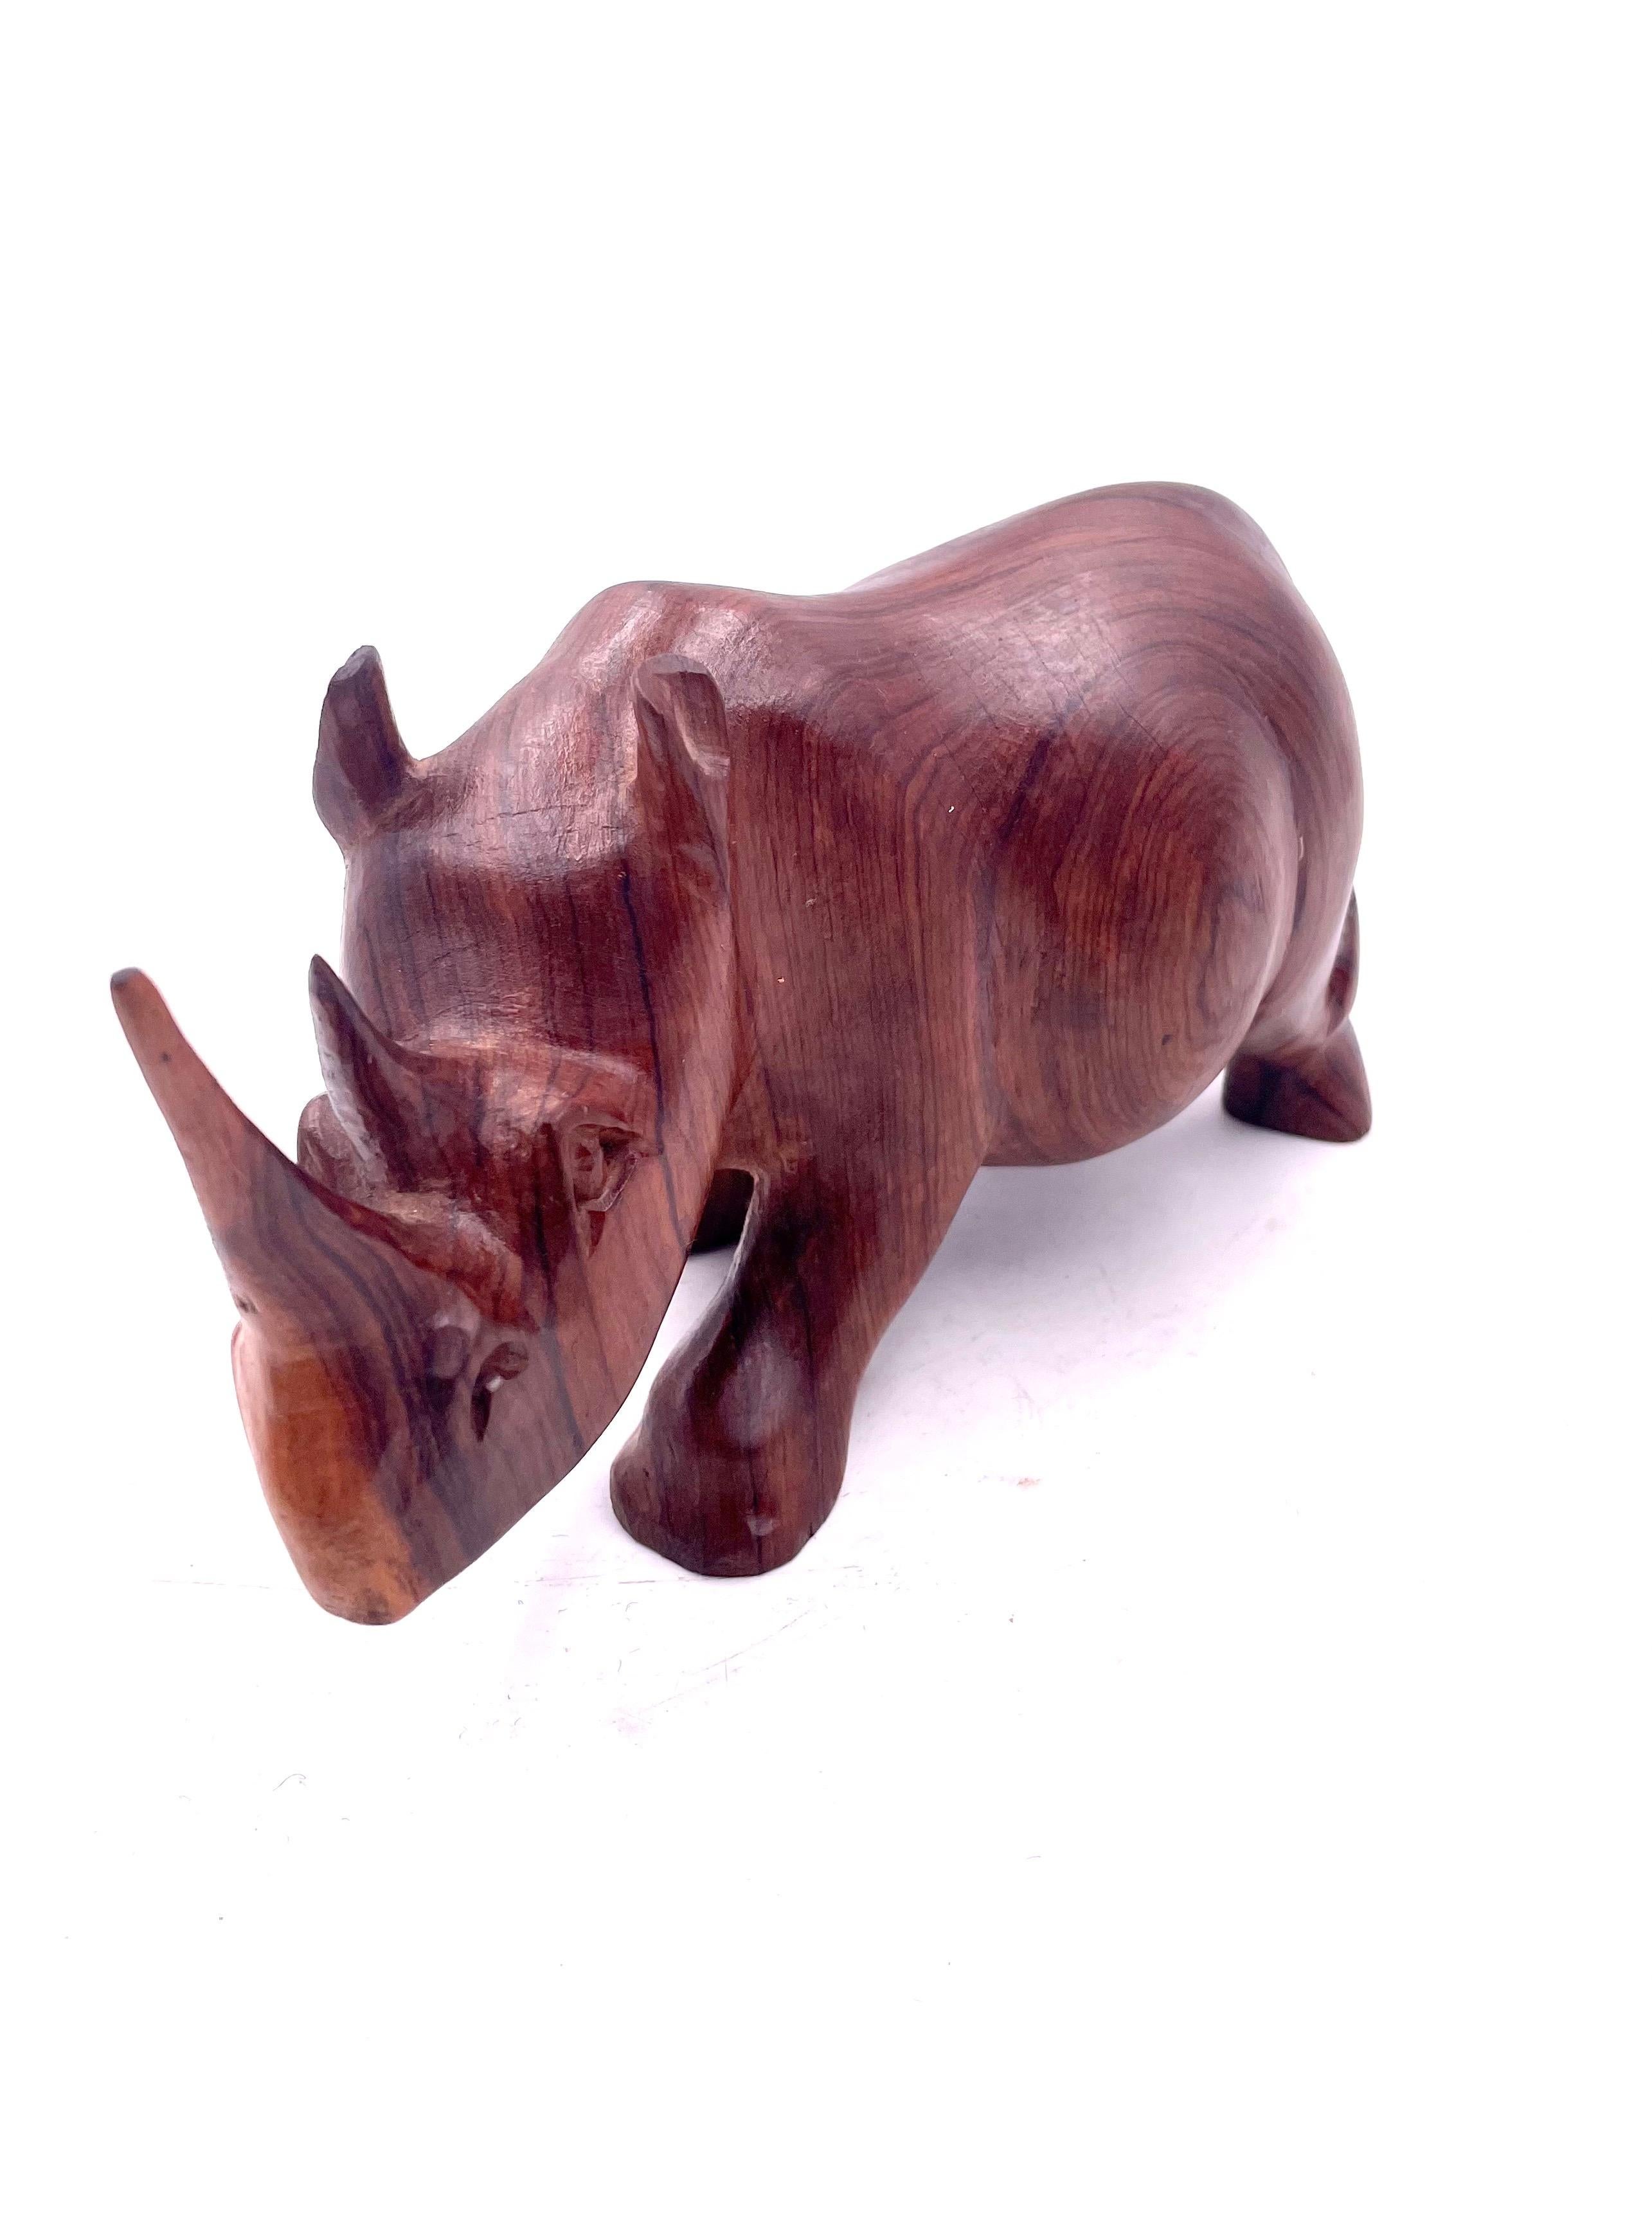 A very cool hand-carved solid walnut rhino sculpture, circa 1980s. The piece is in great condition we have cleaned an oiled the piece.